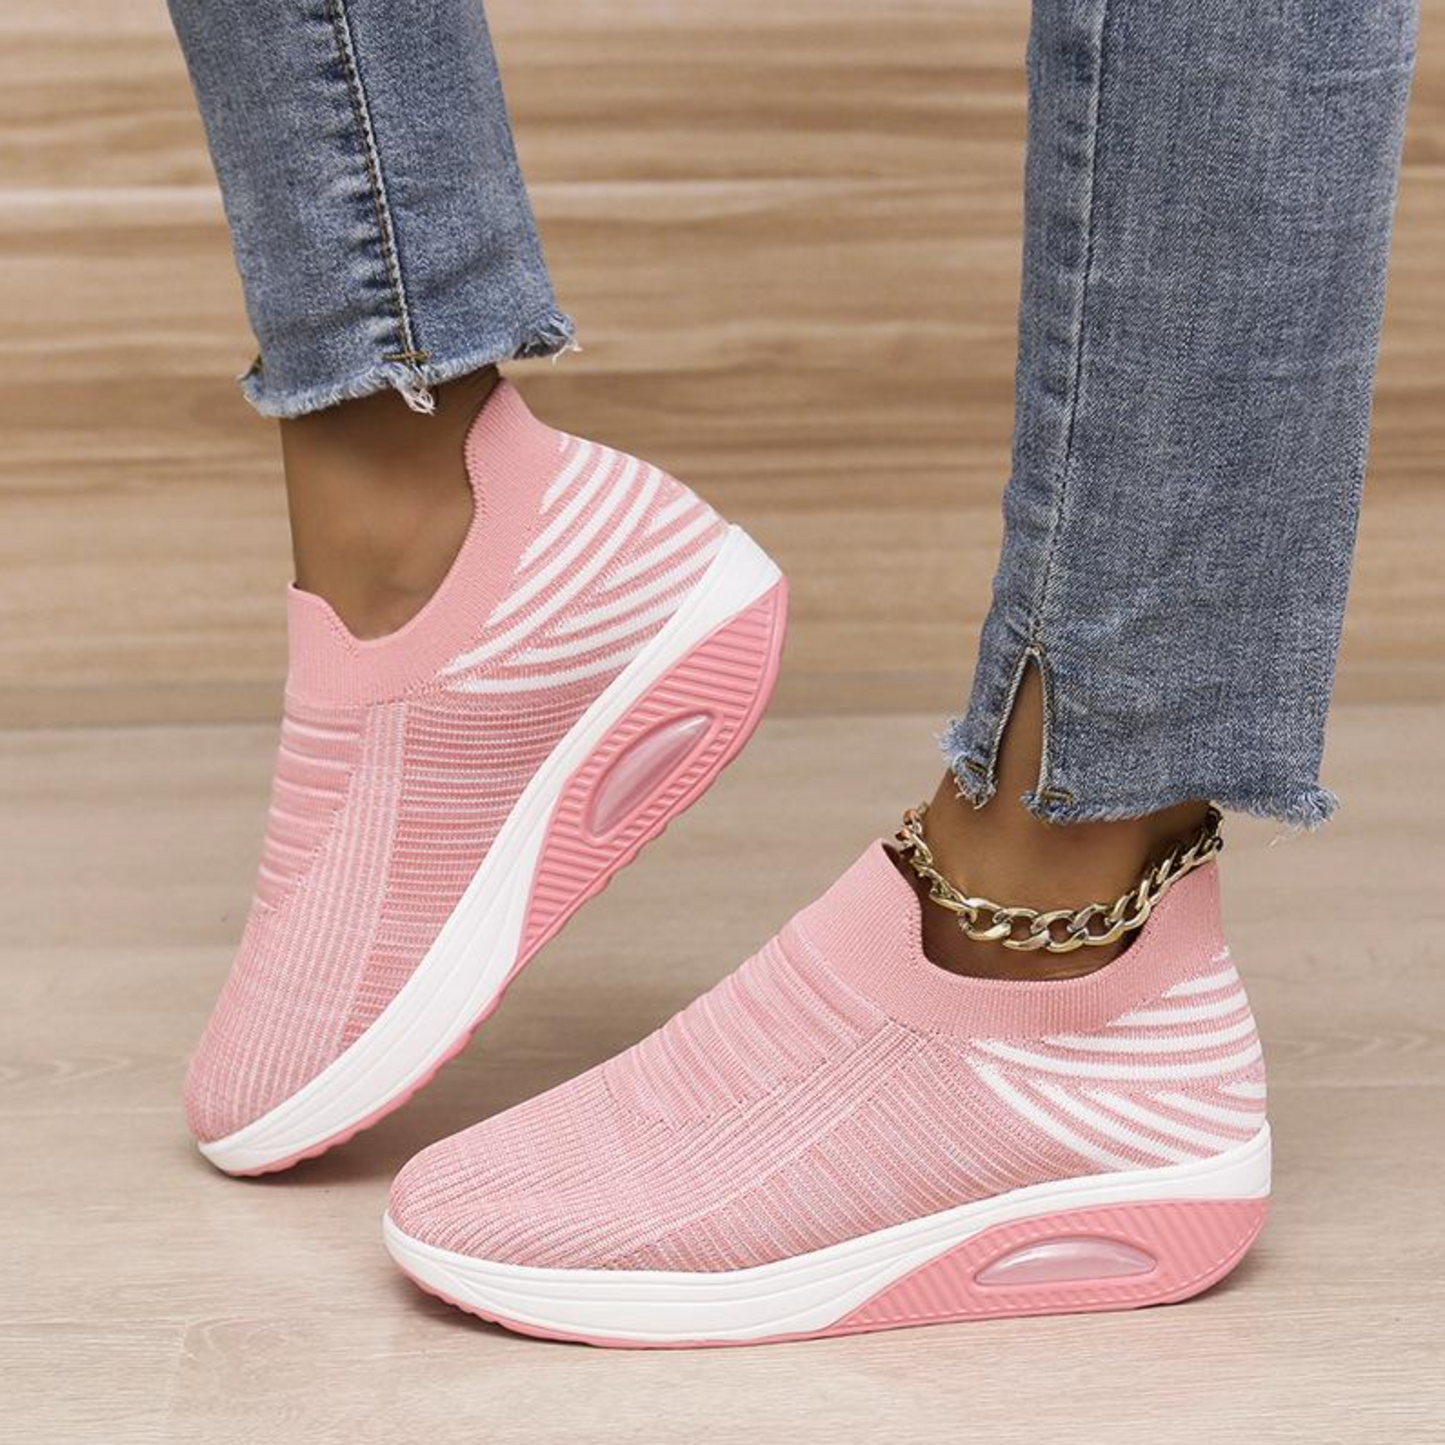 🔥Ladies Fashion Casual Sneakers, Orthopedic Comfy Walking Shoes🔥